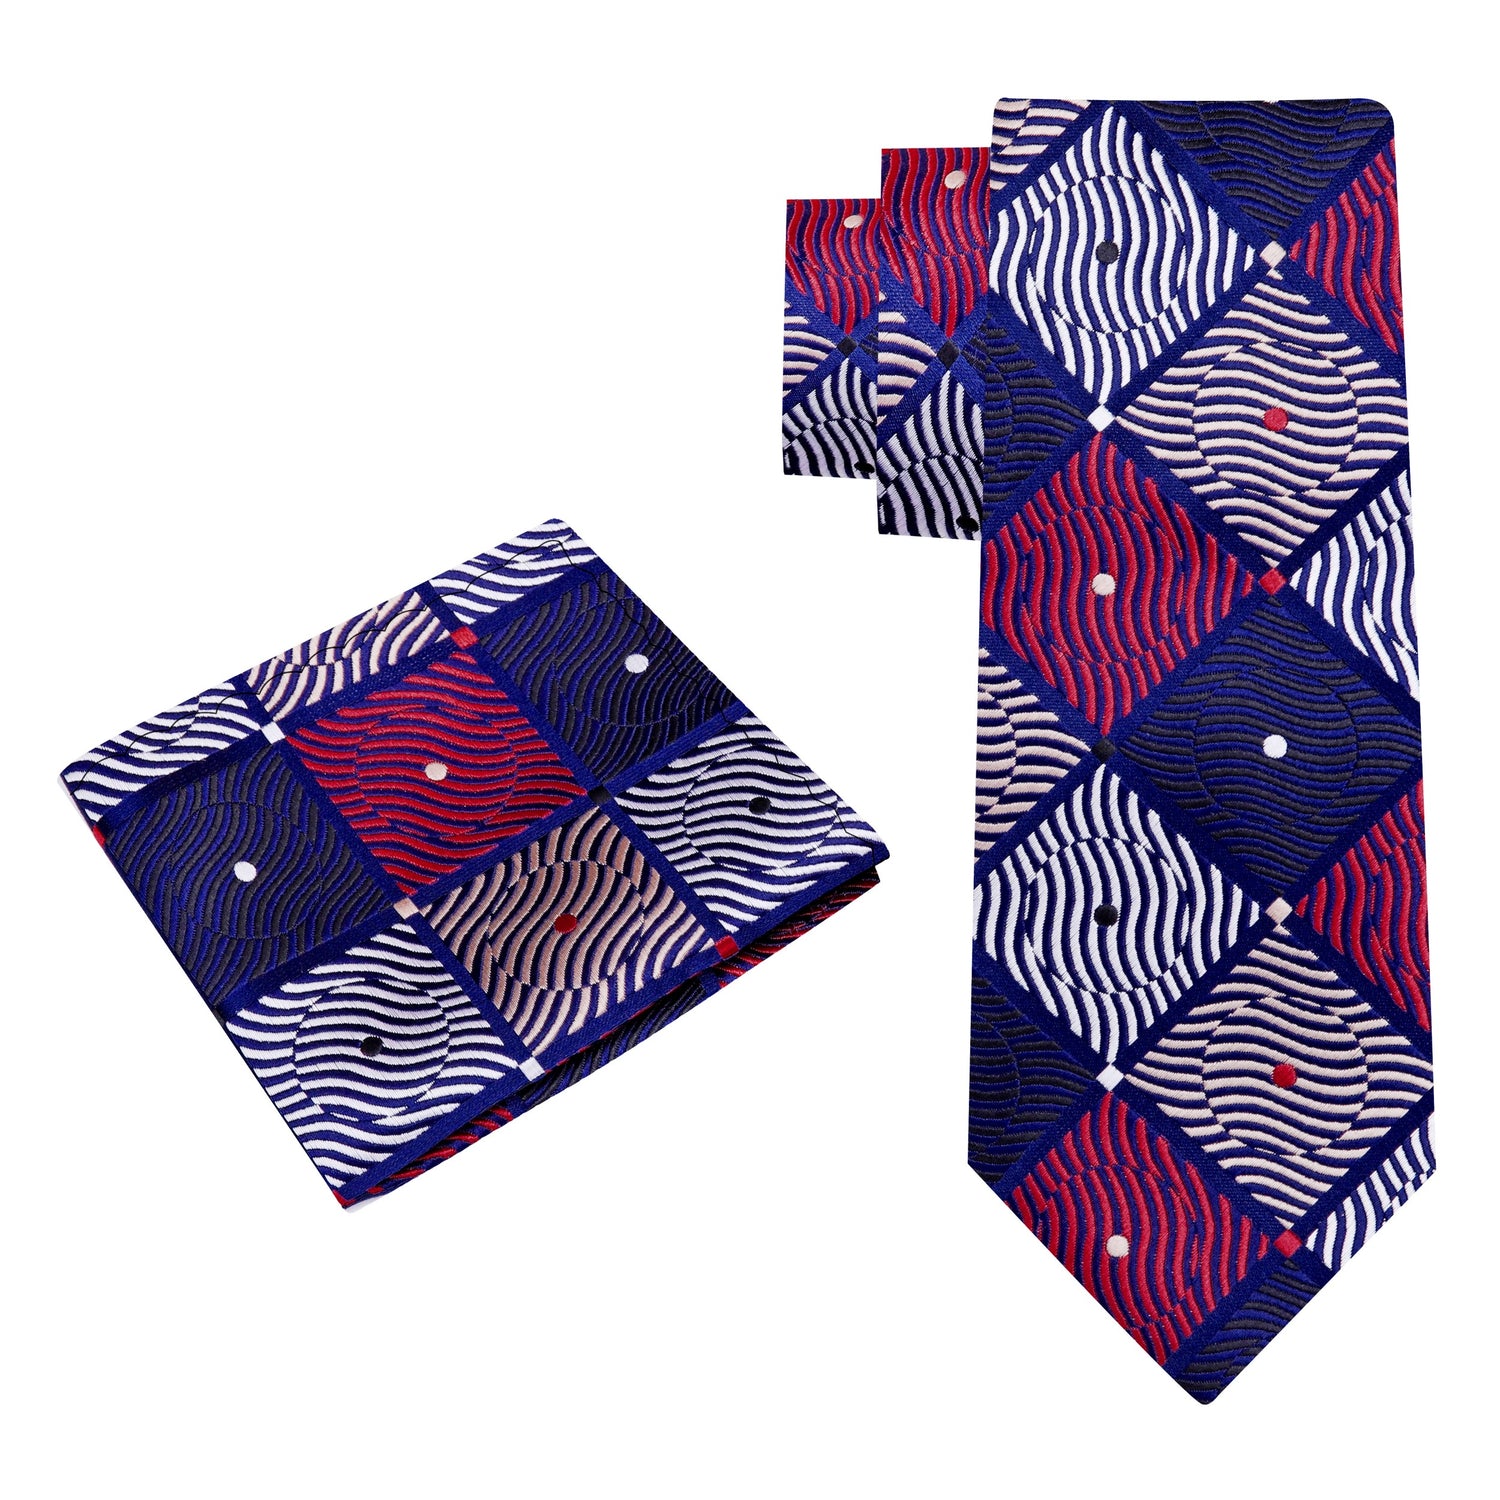 Alt View: A Red, Brown, Blue, Black Geometric With Small Dots Pattern Silk Necktie, Matching Pocket Square